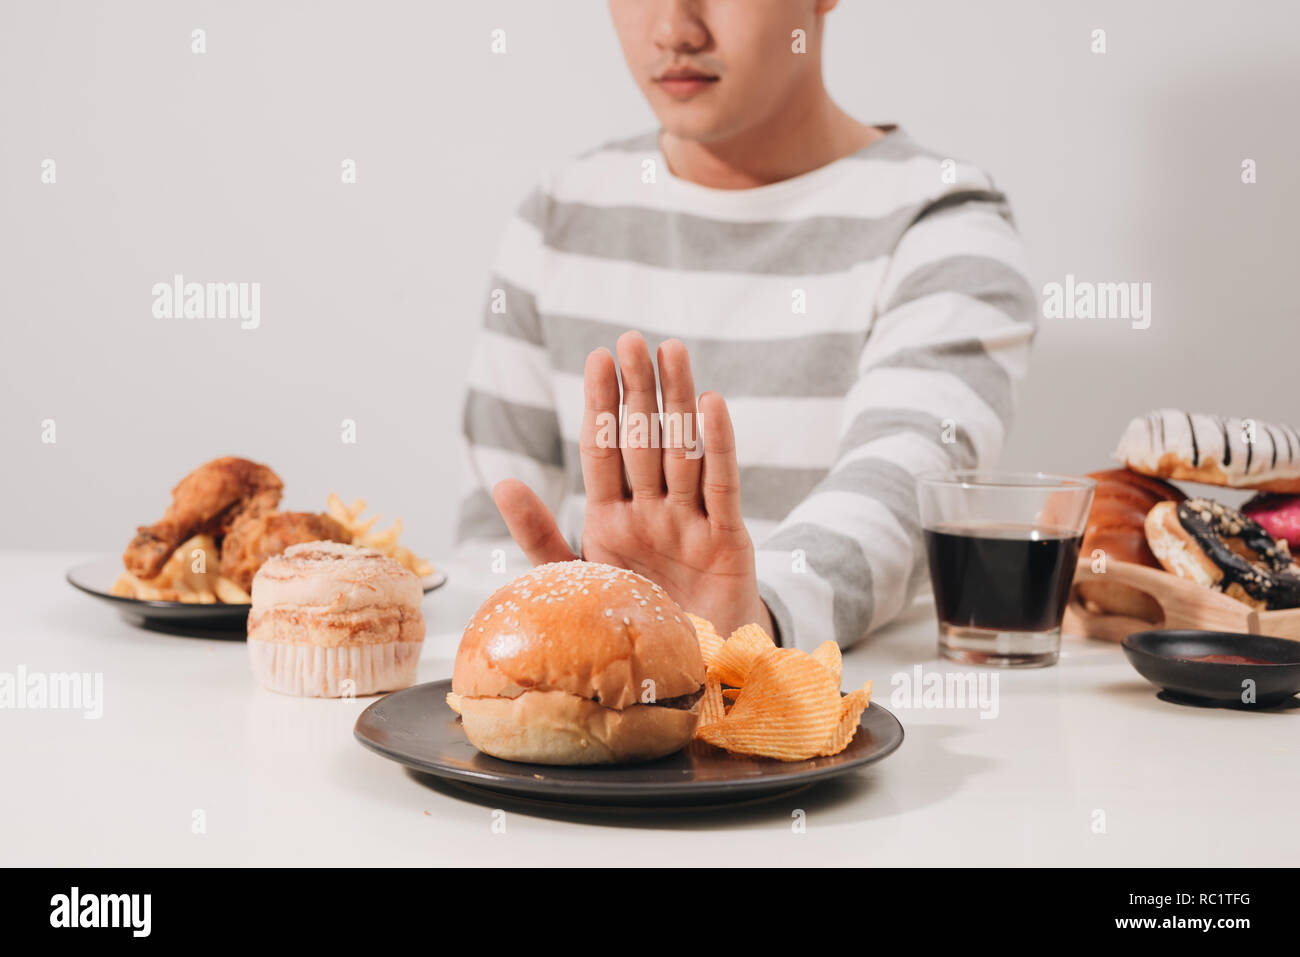 Young man in dieting and healthy eating concept Stock Photo